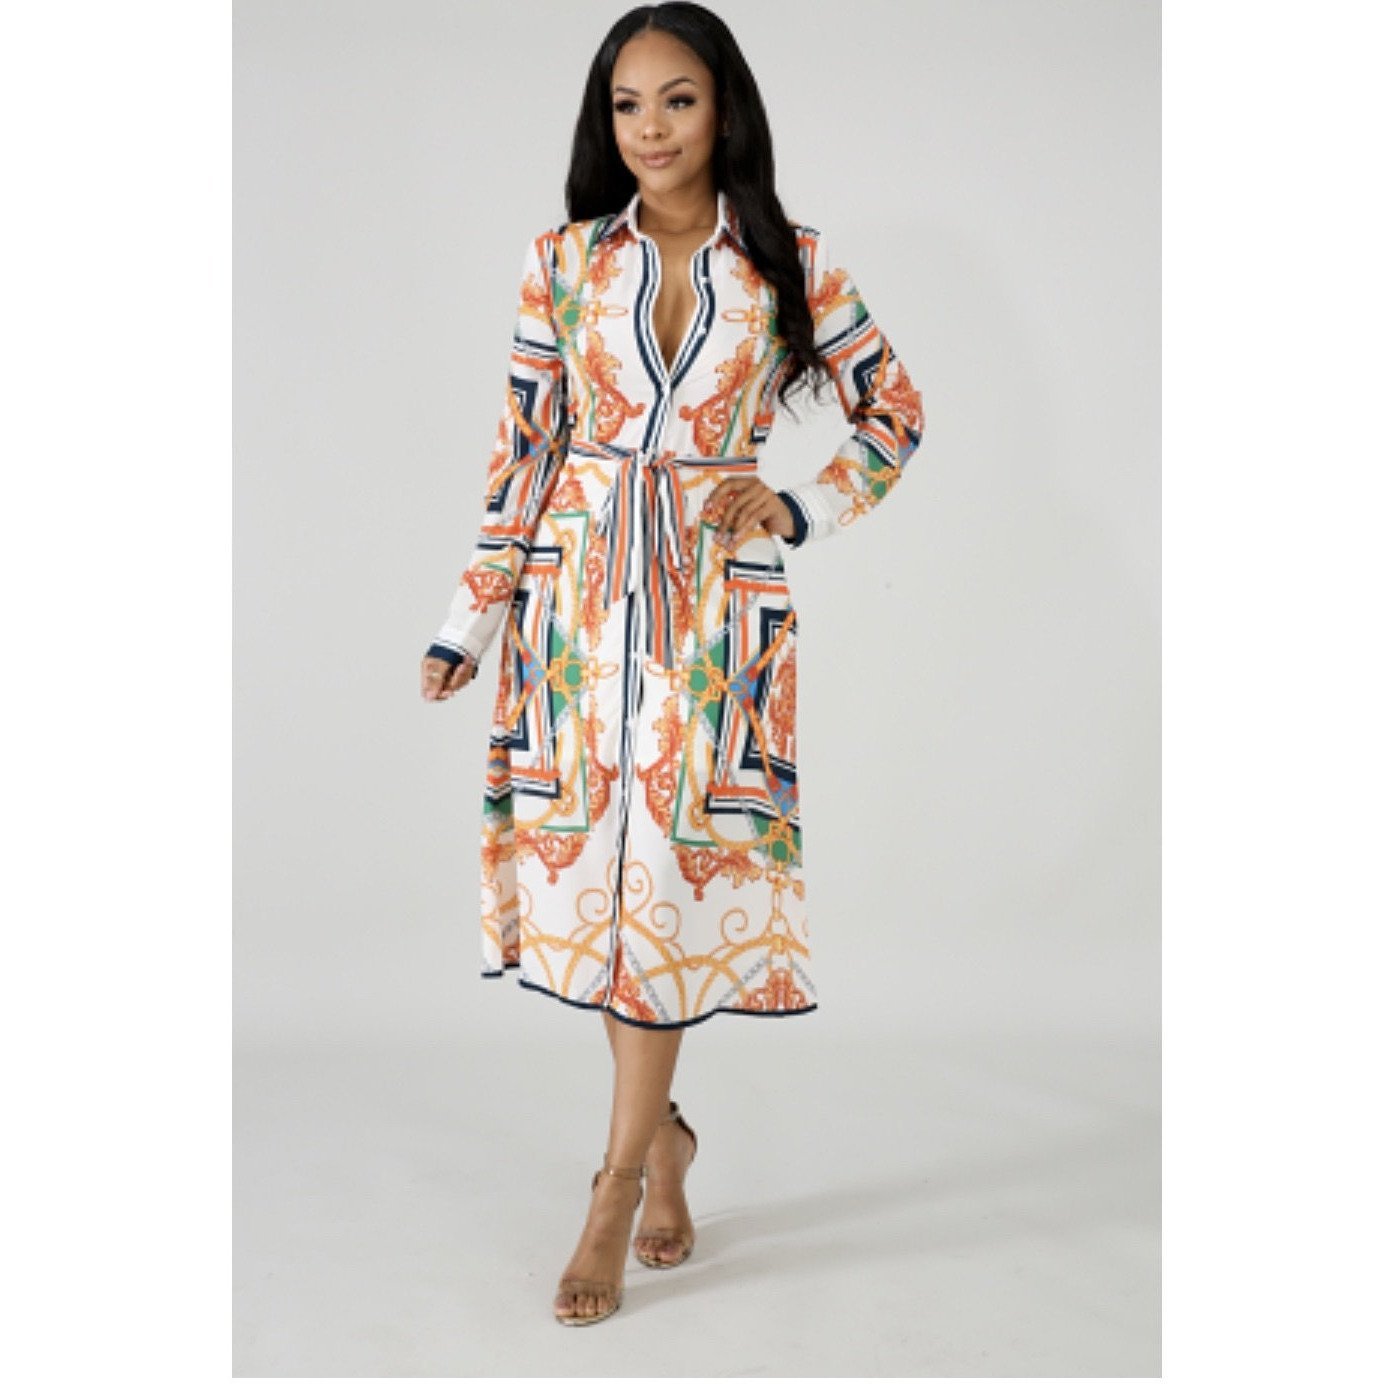 New Gorgeous Print Versatile Midi Dress or Duster - Fabulously Dressed Boutique 